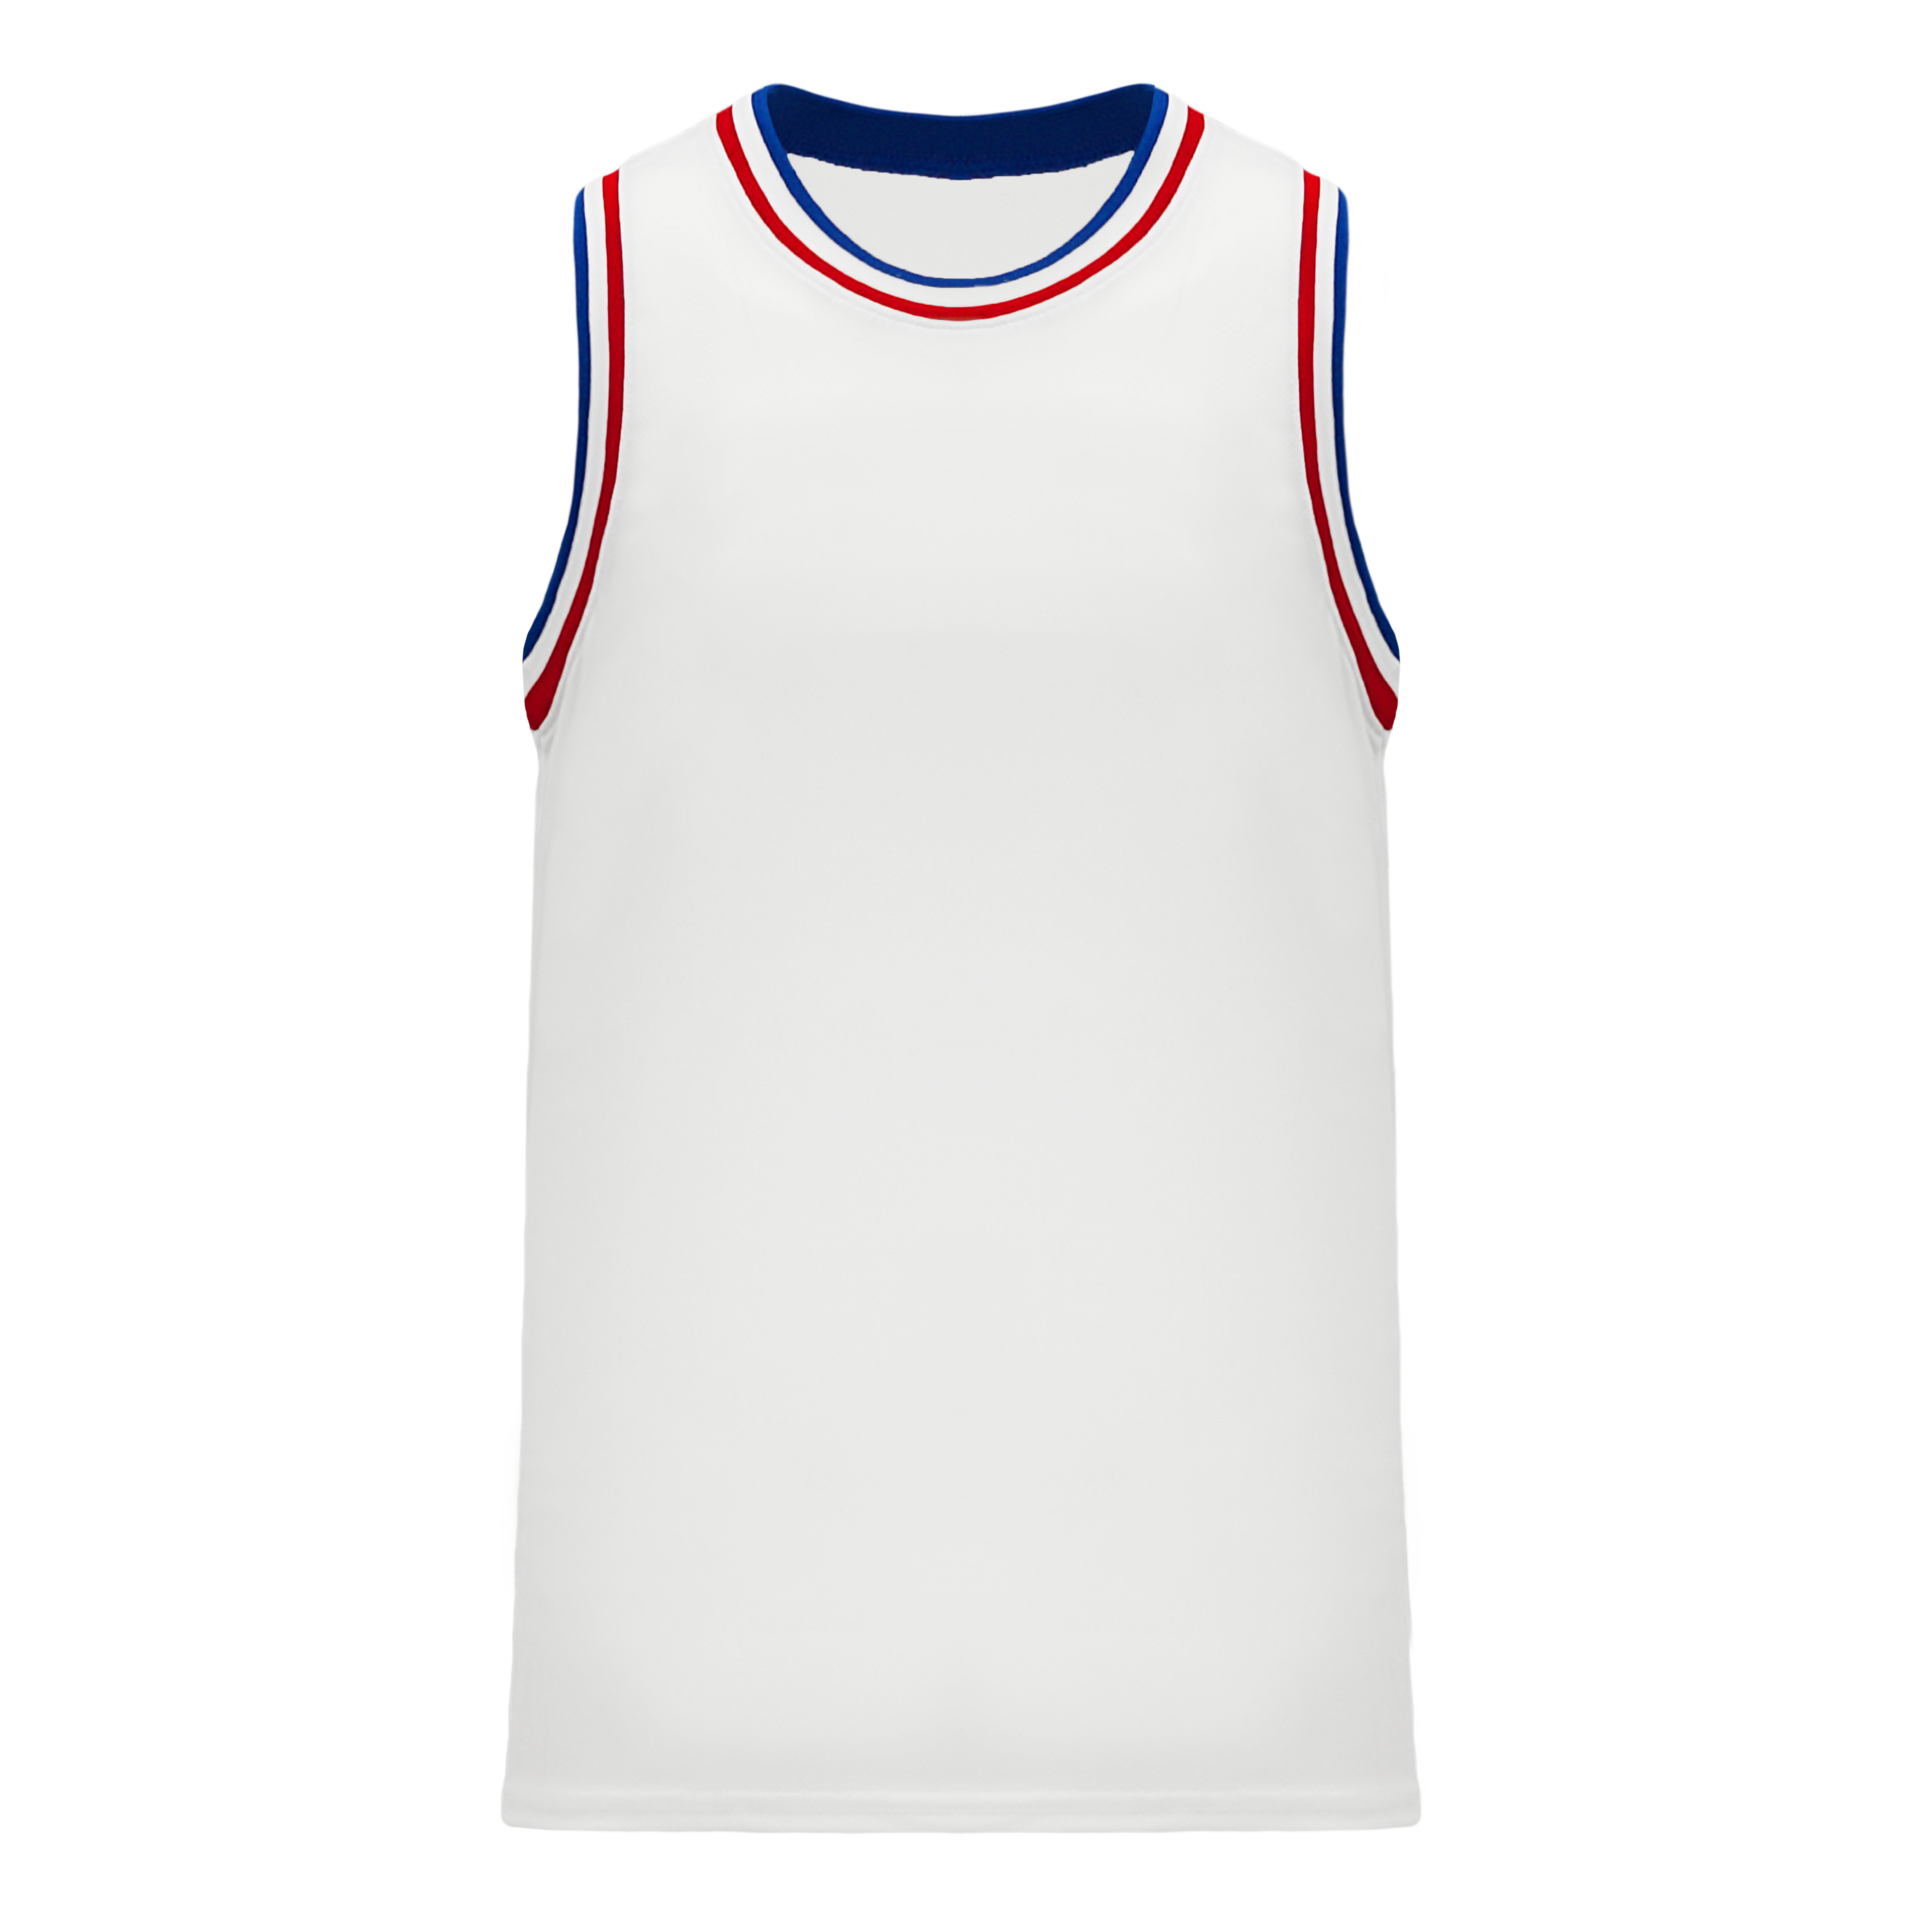 youth detroit pistons jersey